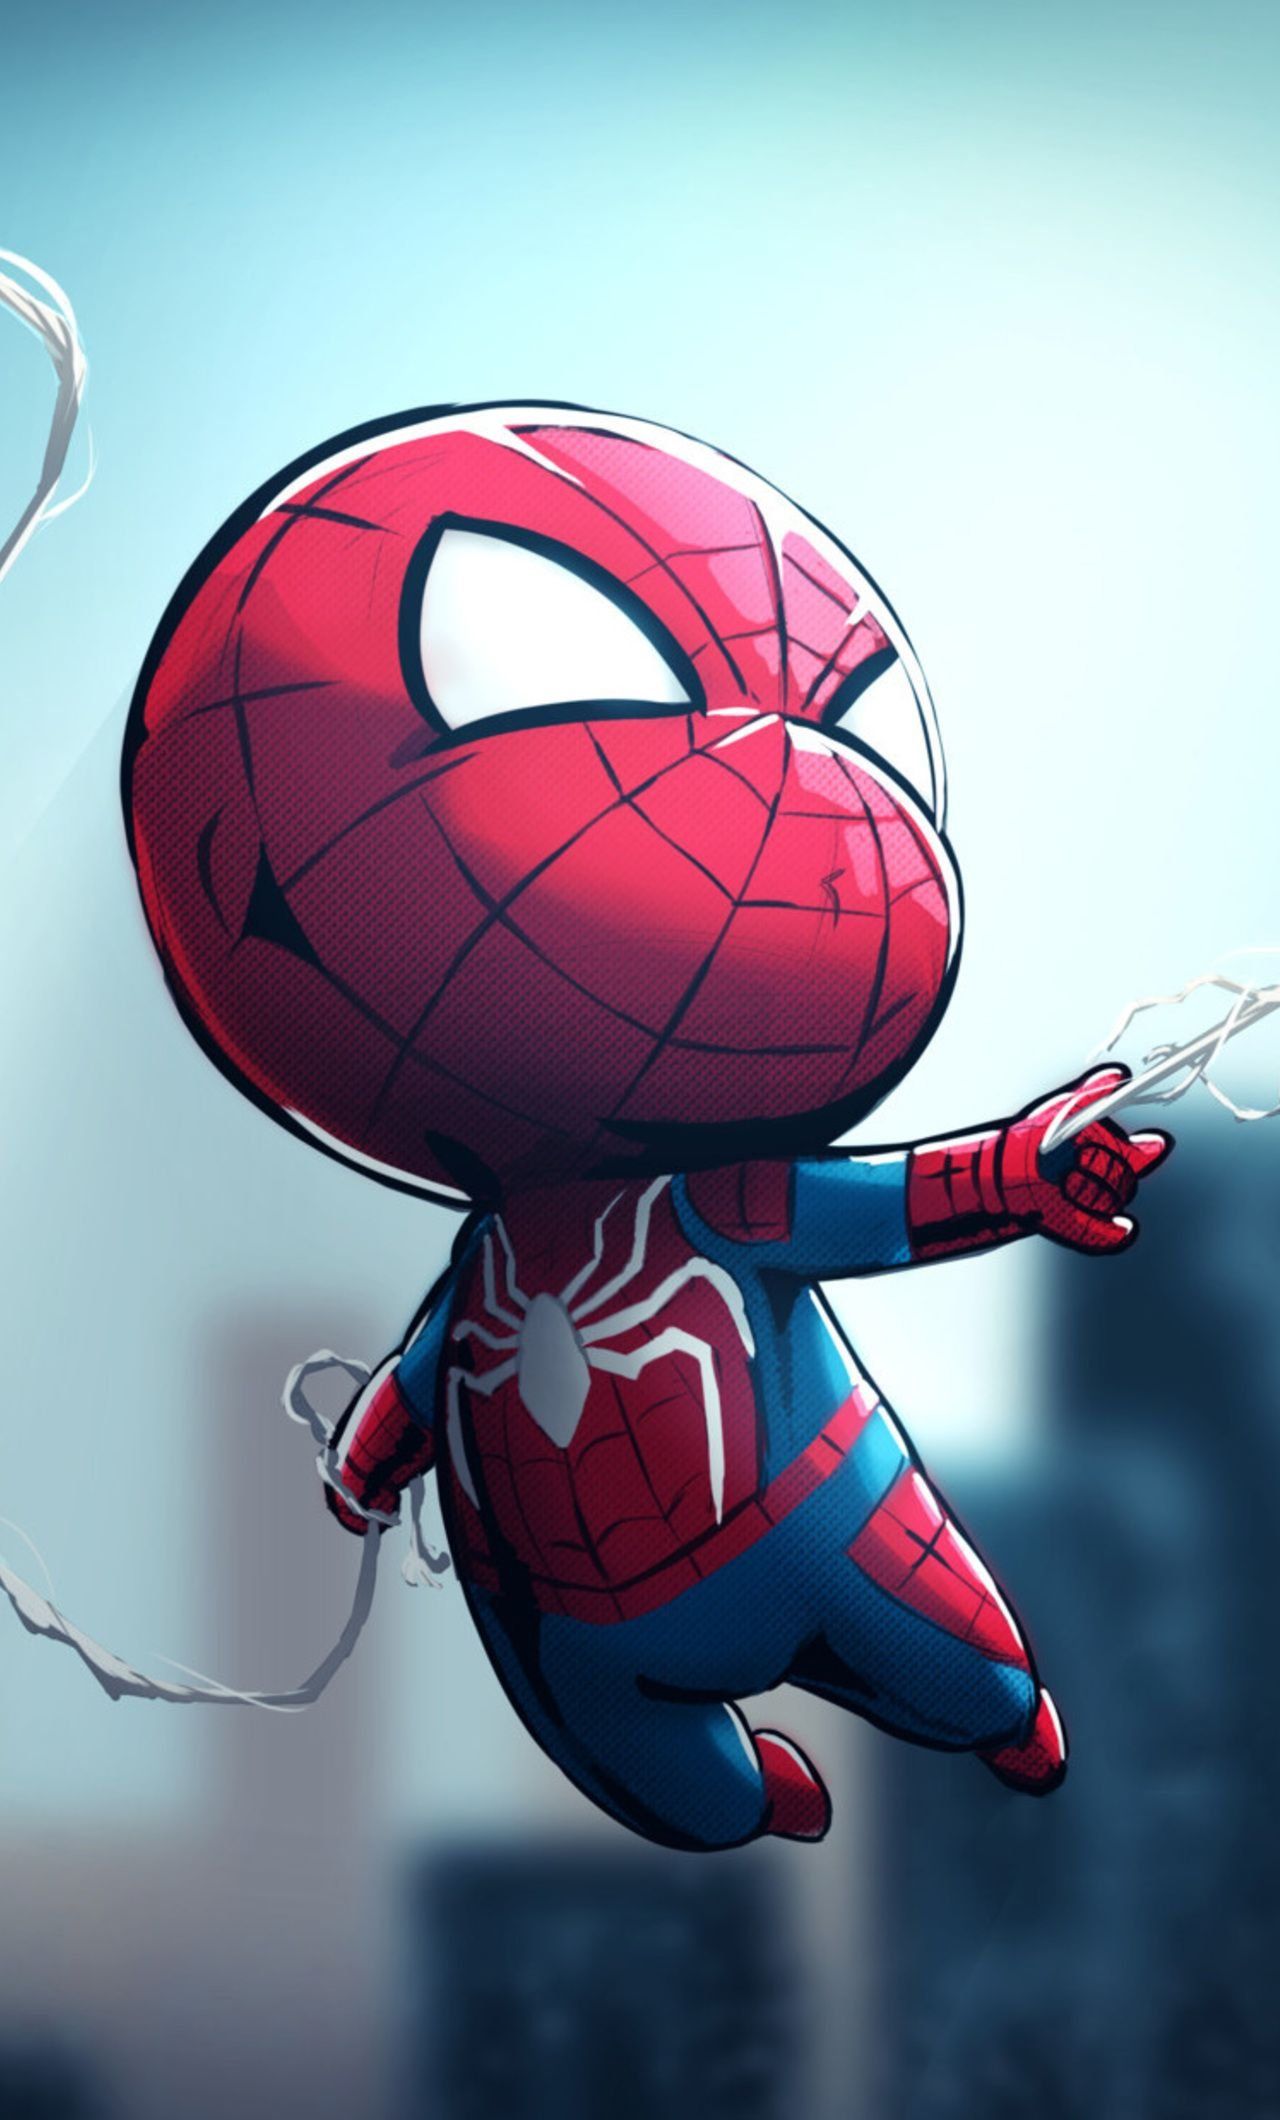 Cute Spiderman Wallpaper For iPhone